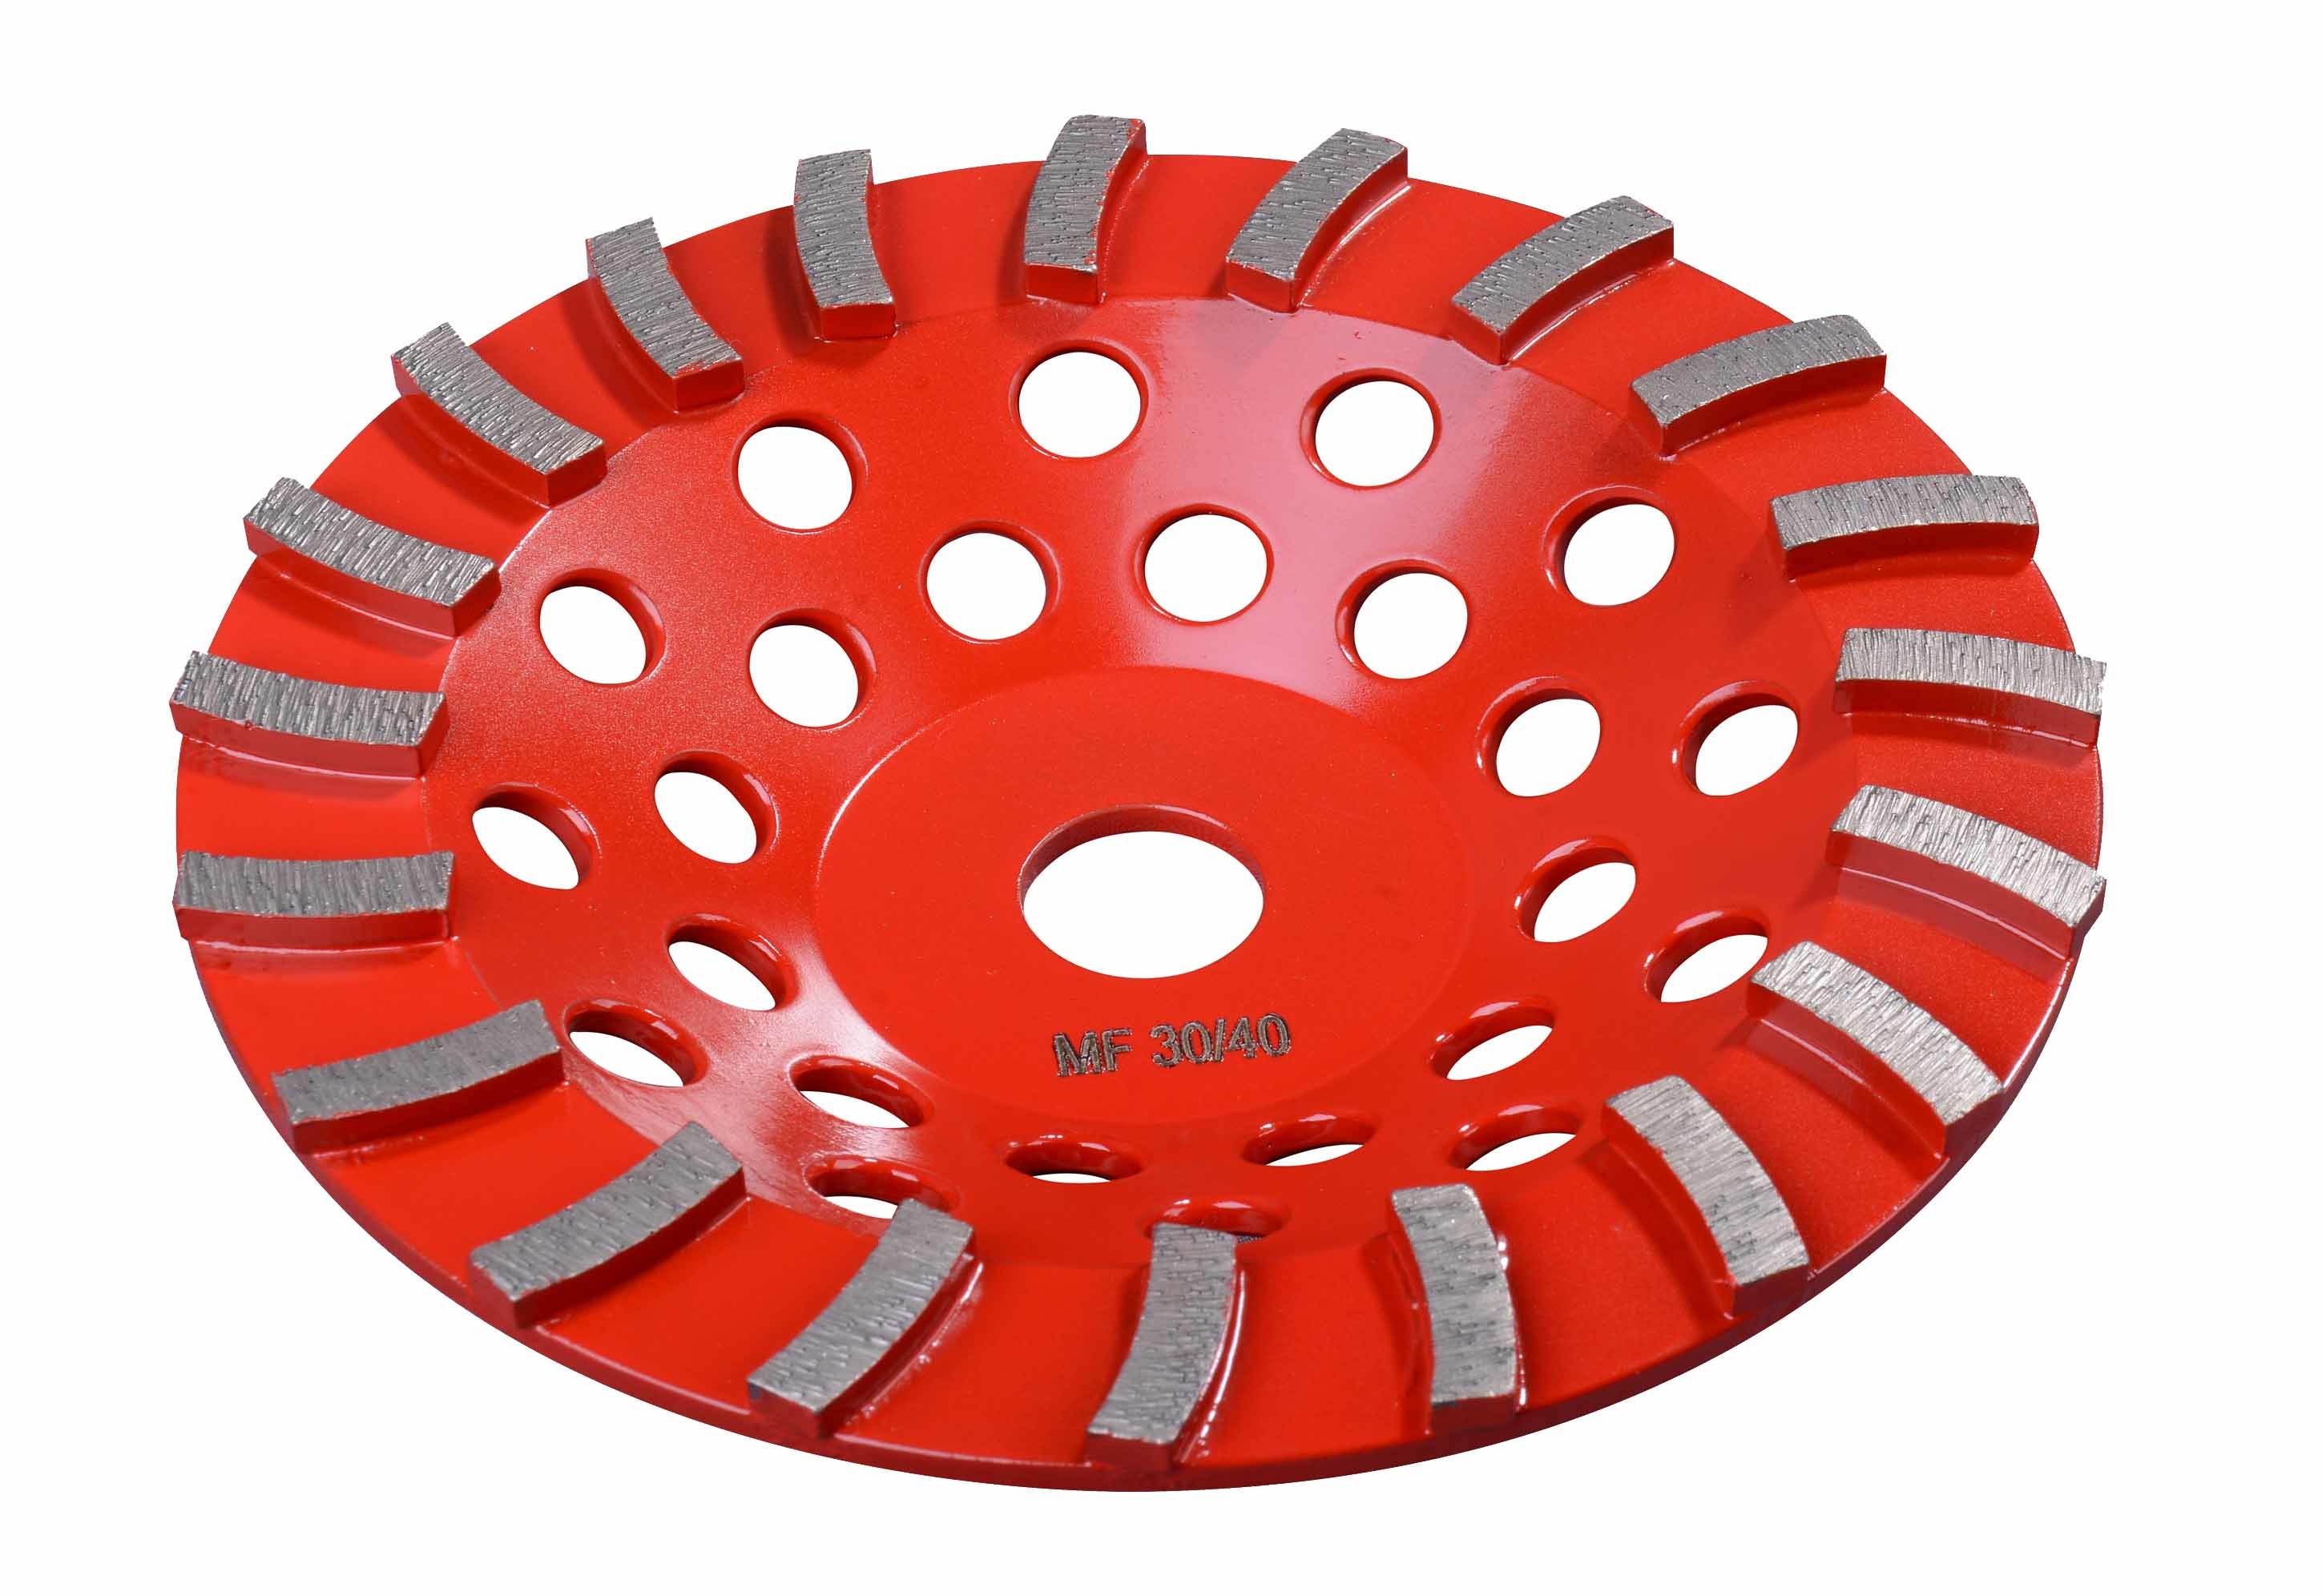 Diamond Cup Wheel for Removal Floor of Concrete and Cement